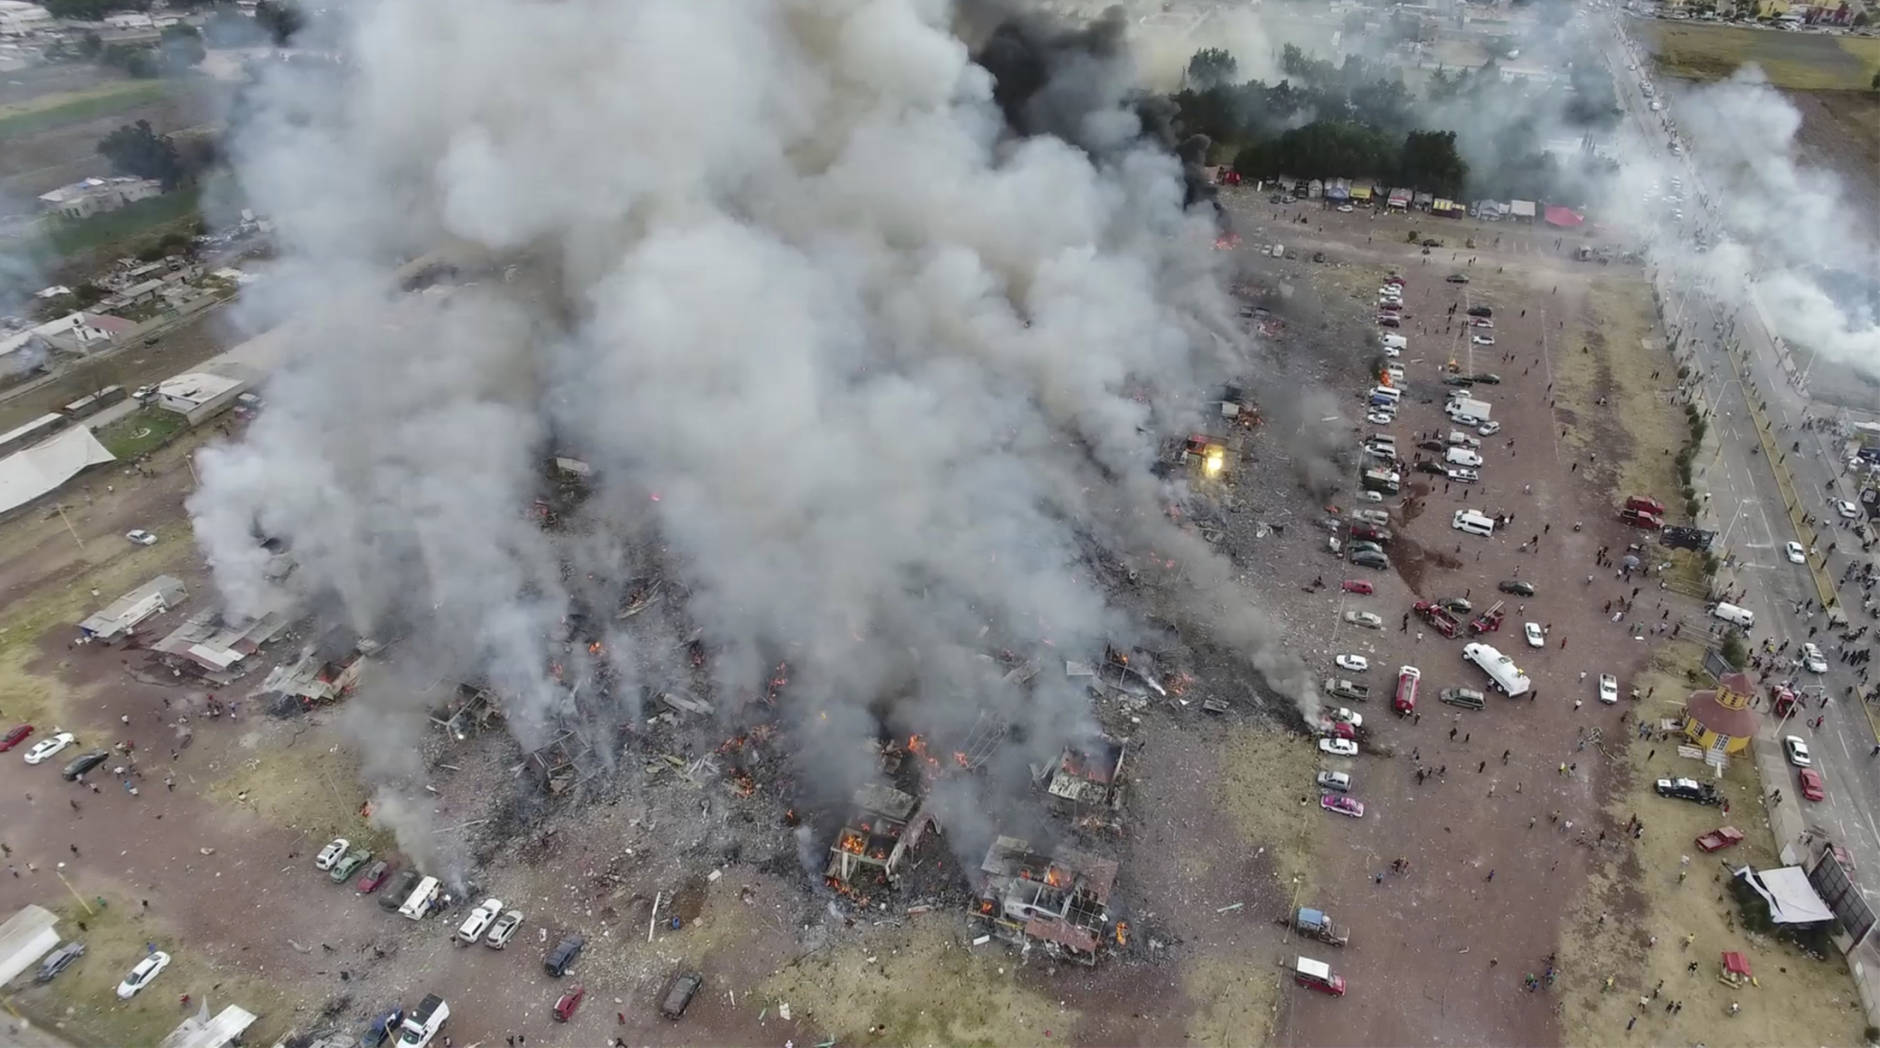 This image made from video provided by APTN, shows a view from a drone of smoke billowing from the San Pablito Market, where an explosion ripped through a fireworks market in Tultepec, Mexico, Tuesday, Dec. 20, 2016. Sirens wailed and a heavy scent of gunpowder lingered in the air after the afternoon blast at the market, where most of the fireworks stalls were completely leveled. According to the Mexico state prosecutor there are at least 26 dead. (Pro Tultepec via APTN)